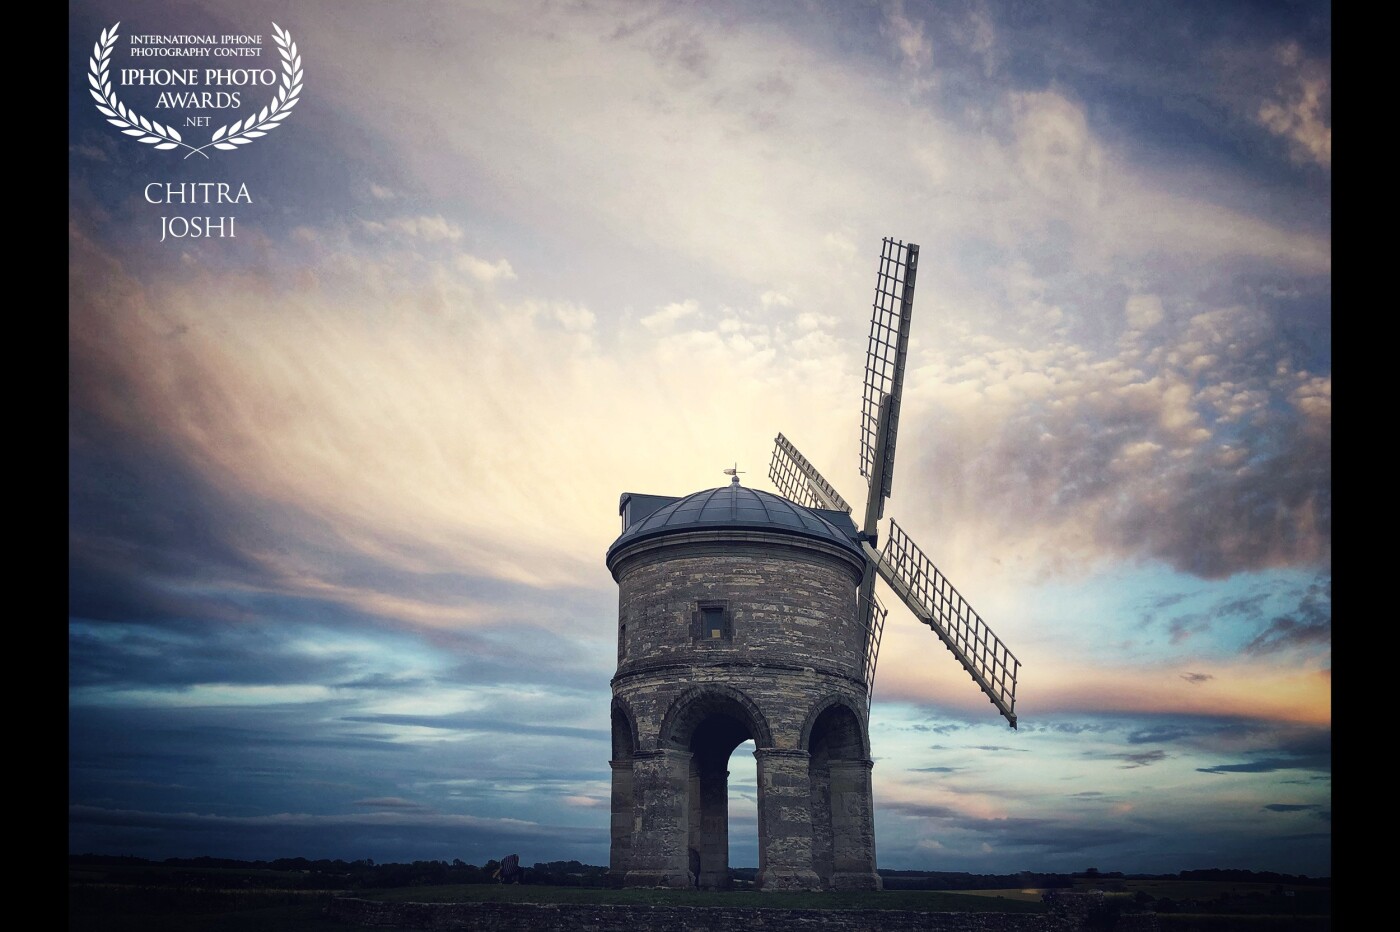 This colorful sunset sky was captured at Chesterton Windmill, UK. Chesterton Windmill is a 17th-century cylindric stone tower windmill with an arched base, located outside the village of Chesterton, Warwickshire. It is a Grade I listed building and a striking landmark in south-east Warwickshire. 